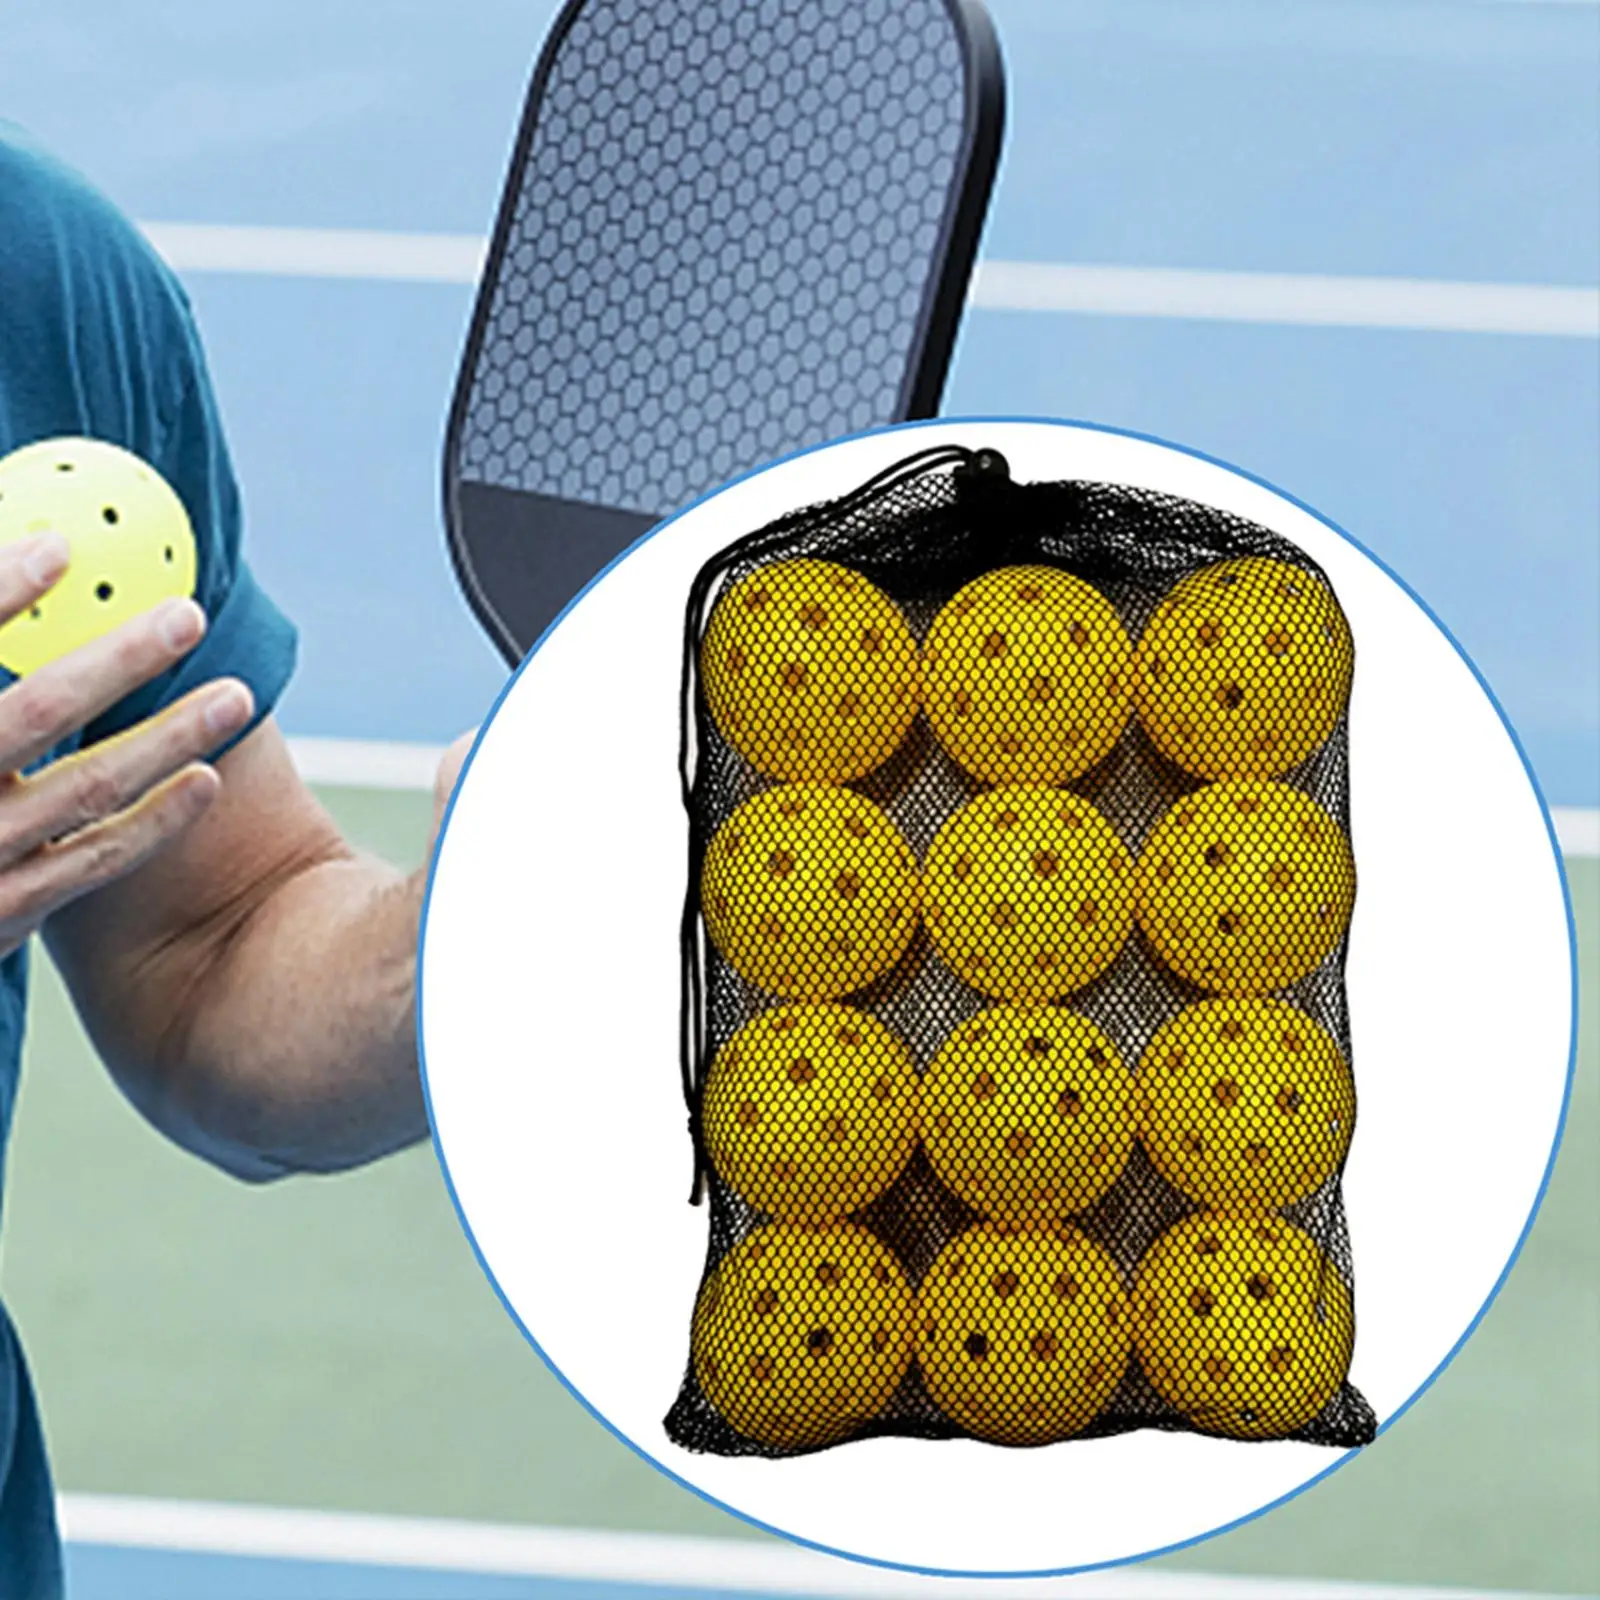 12 Pieces Pickleball Balls Accs 74mm Pickle Balls Practice Hollow Ball Competition Ball Training Pickleball for Indoor Outdoor